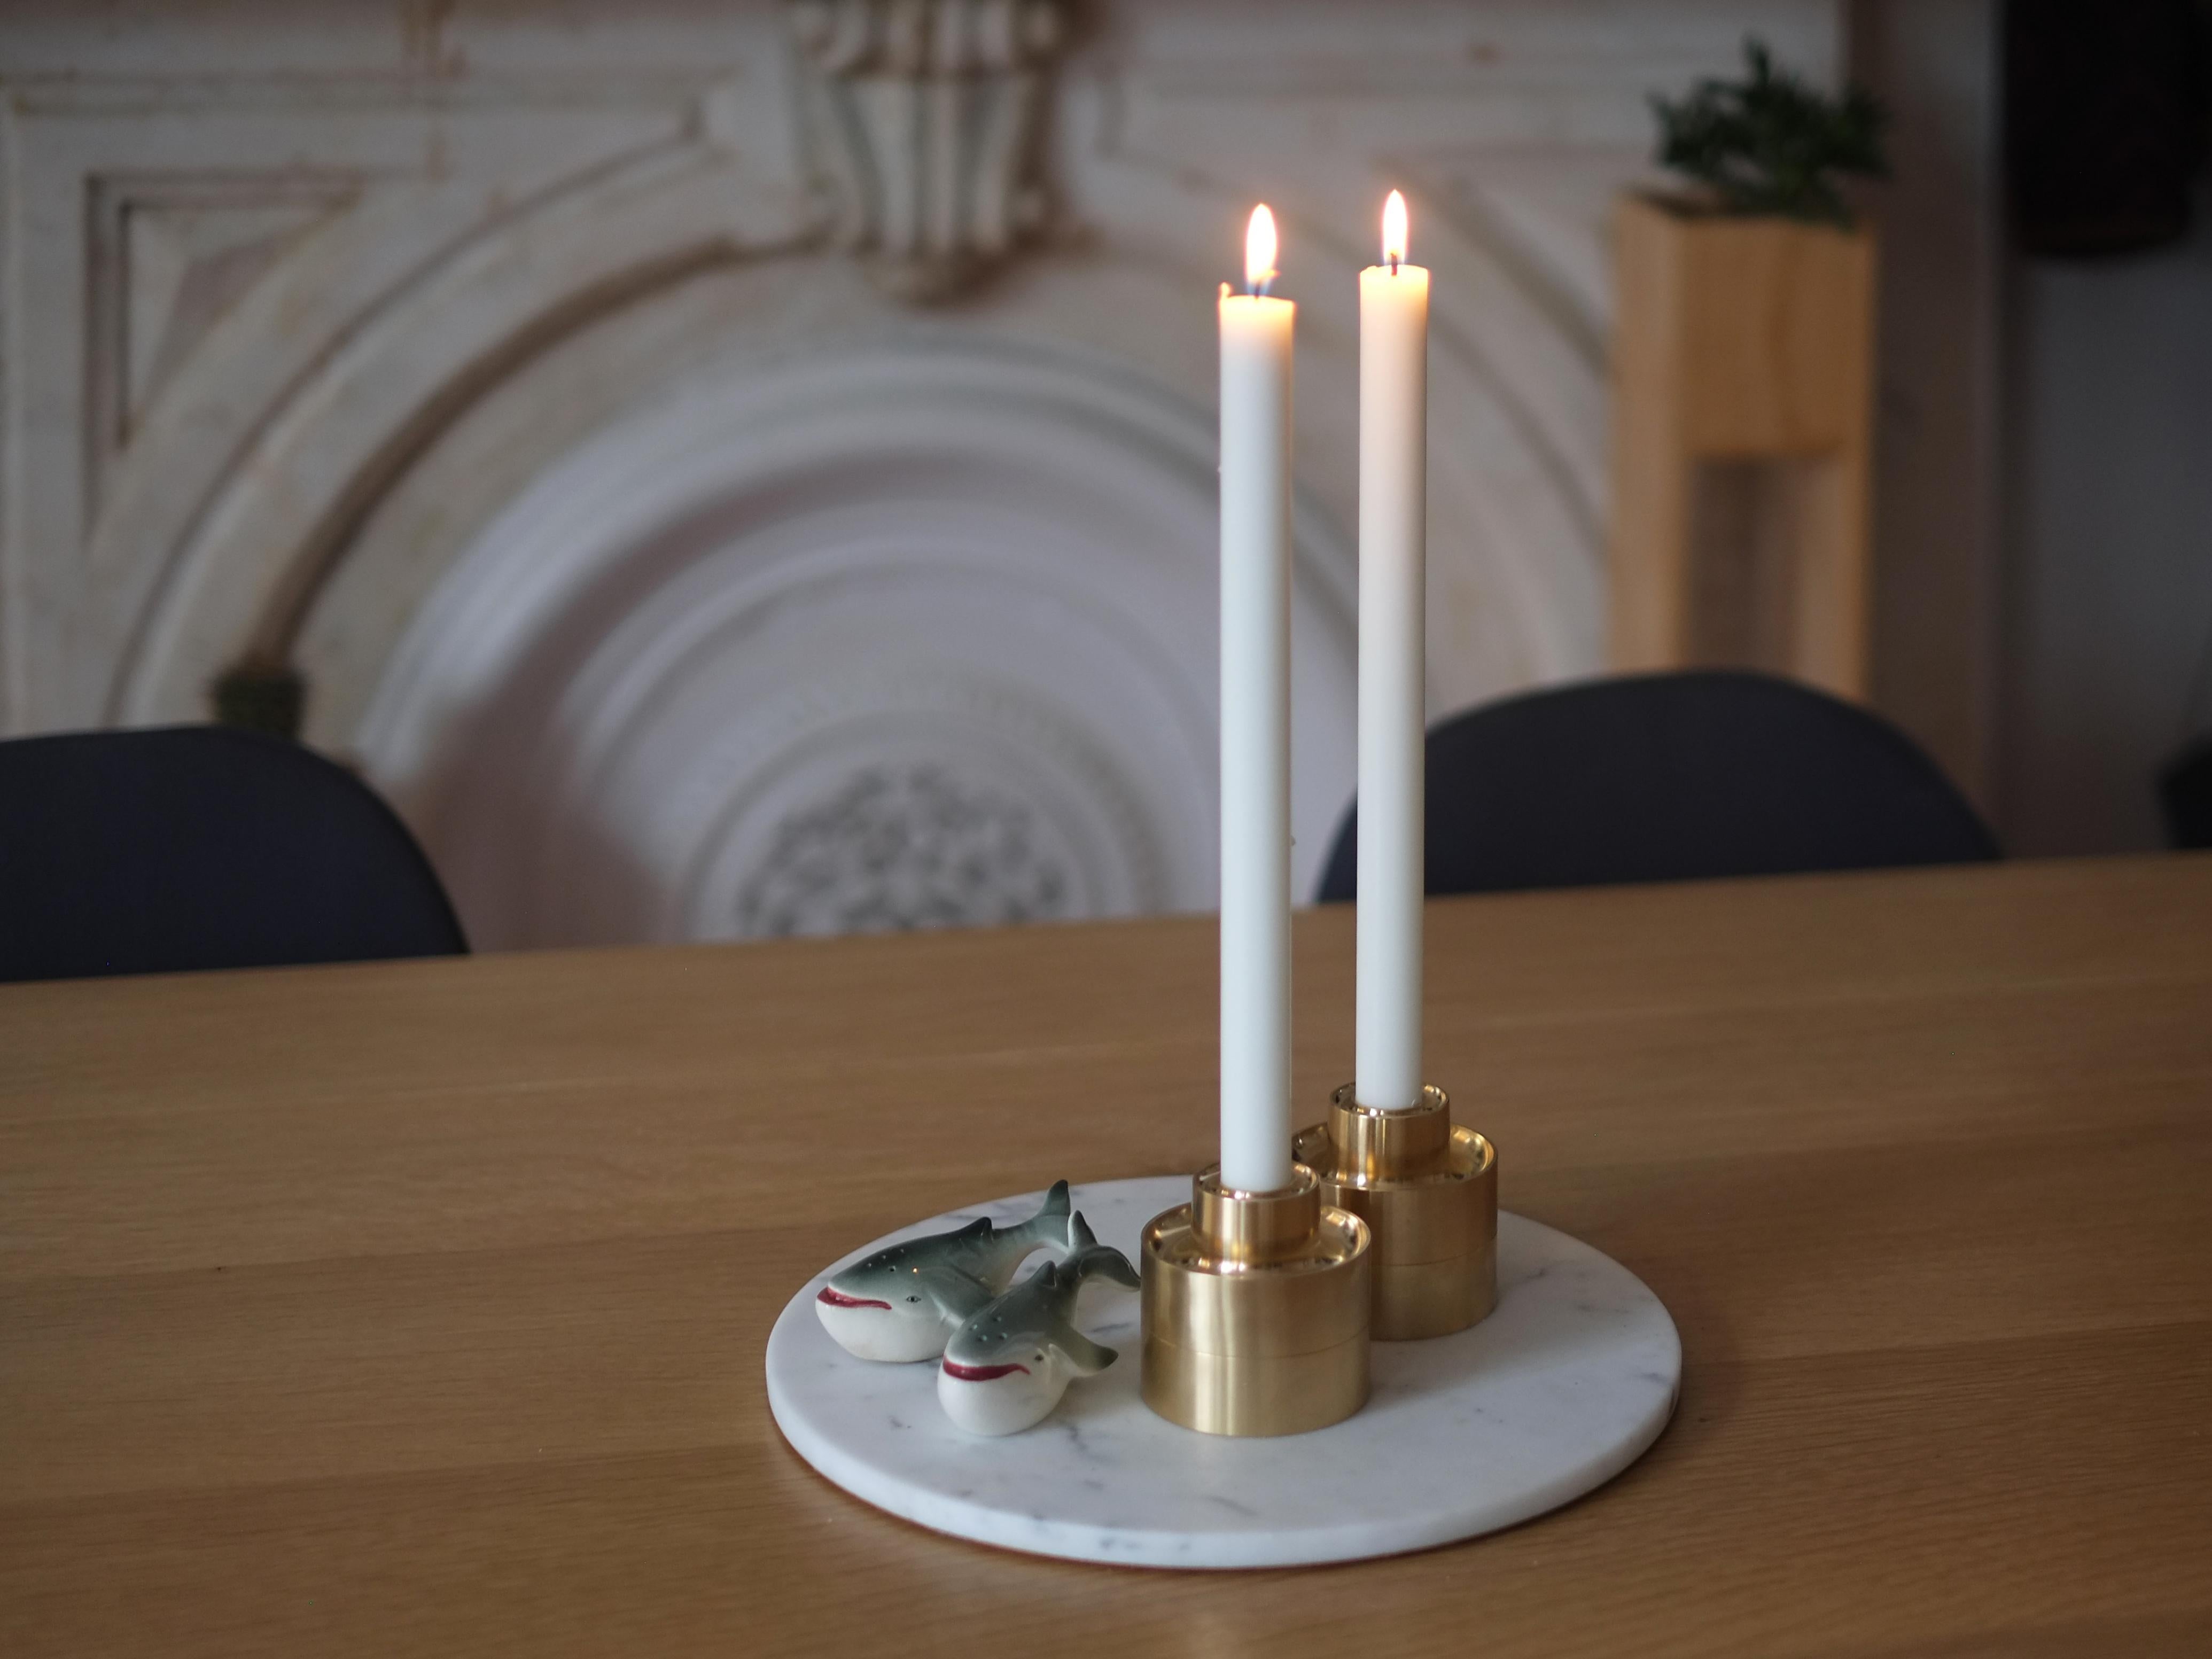 Stack and flip these solid brass candle holders to light up any room.

Machined from a solid billet of brass, the Stacking Candle Holders demonstrate the impressive weight of brass and the precision finish of the tool used to form them. Designed